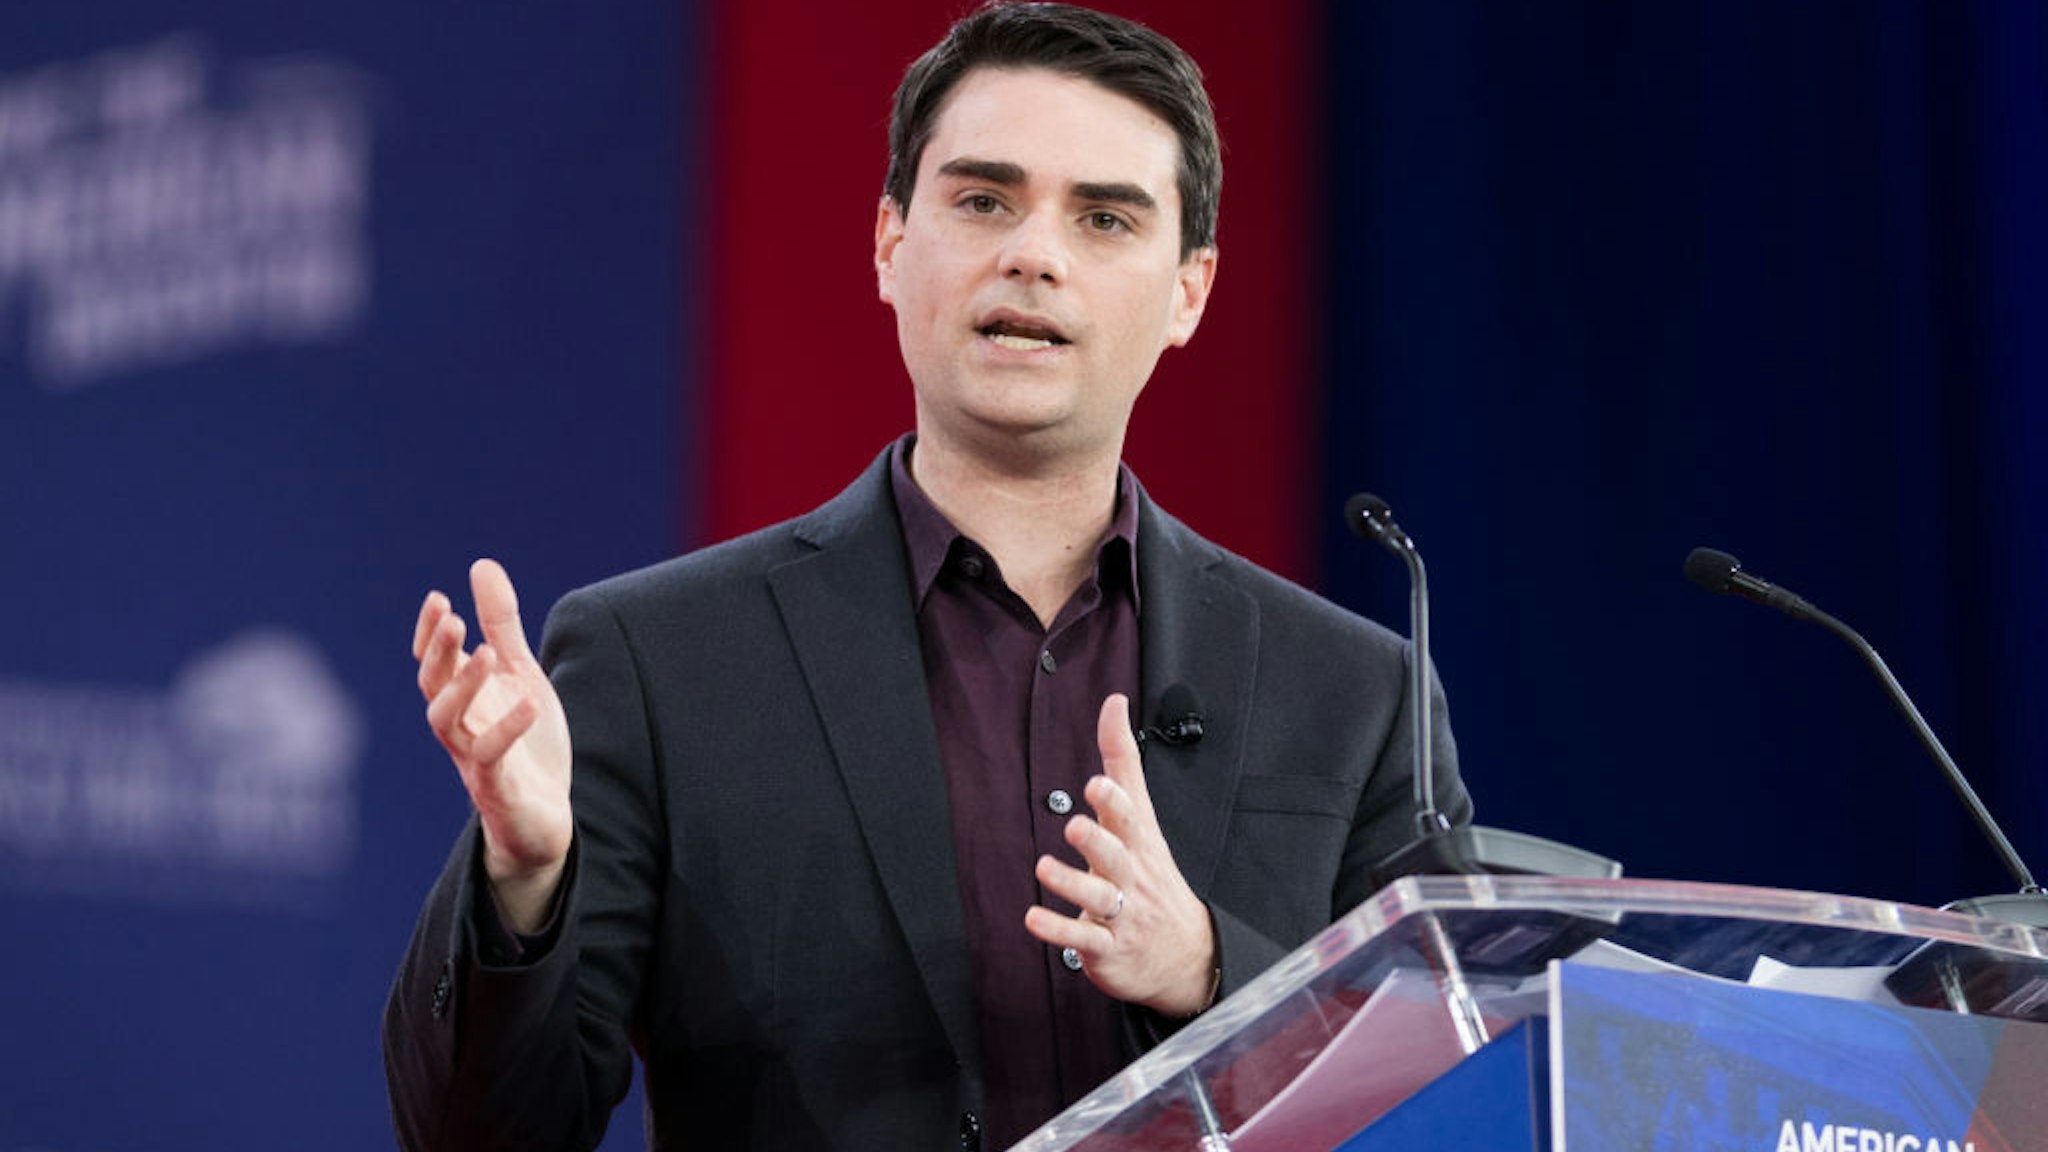 OXON HILL, MD, UNITED STATES - 2018/02/22: Ben Shapiro, host of his online political podcast The Ben Shapiro Show, at the Conservative Political Action Conference (CPAC) sponsored by the American Conservative Union held at the Gaylord National Resort &amp; Convention Center in Oxon Hill. (Photo by Michael Brochstein/SOPA Images/LightRocket via Getty Images)